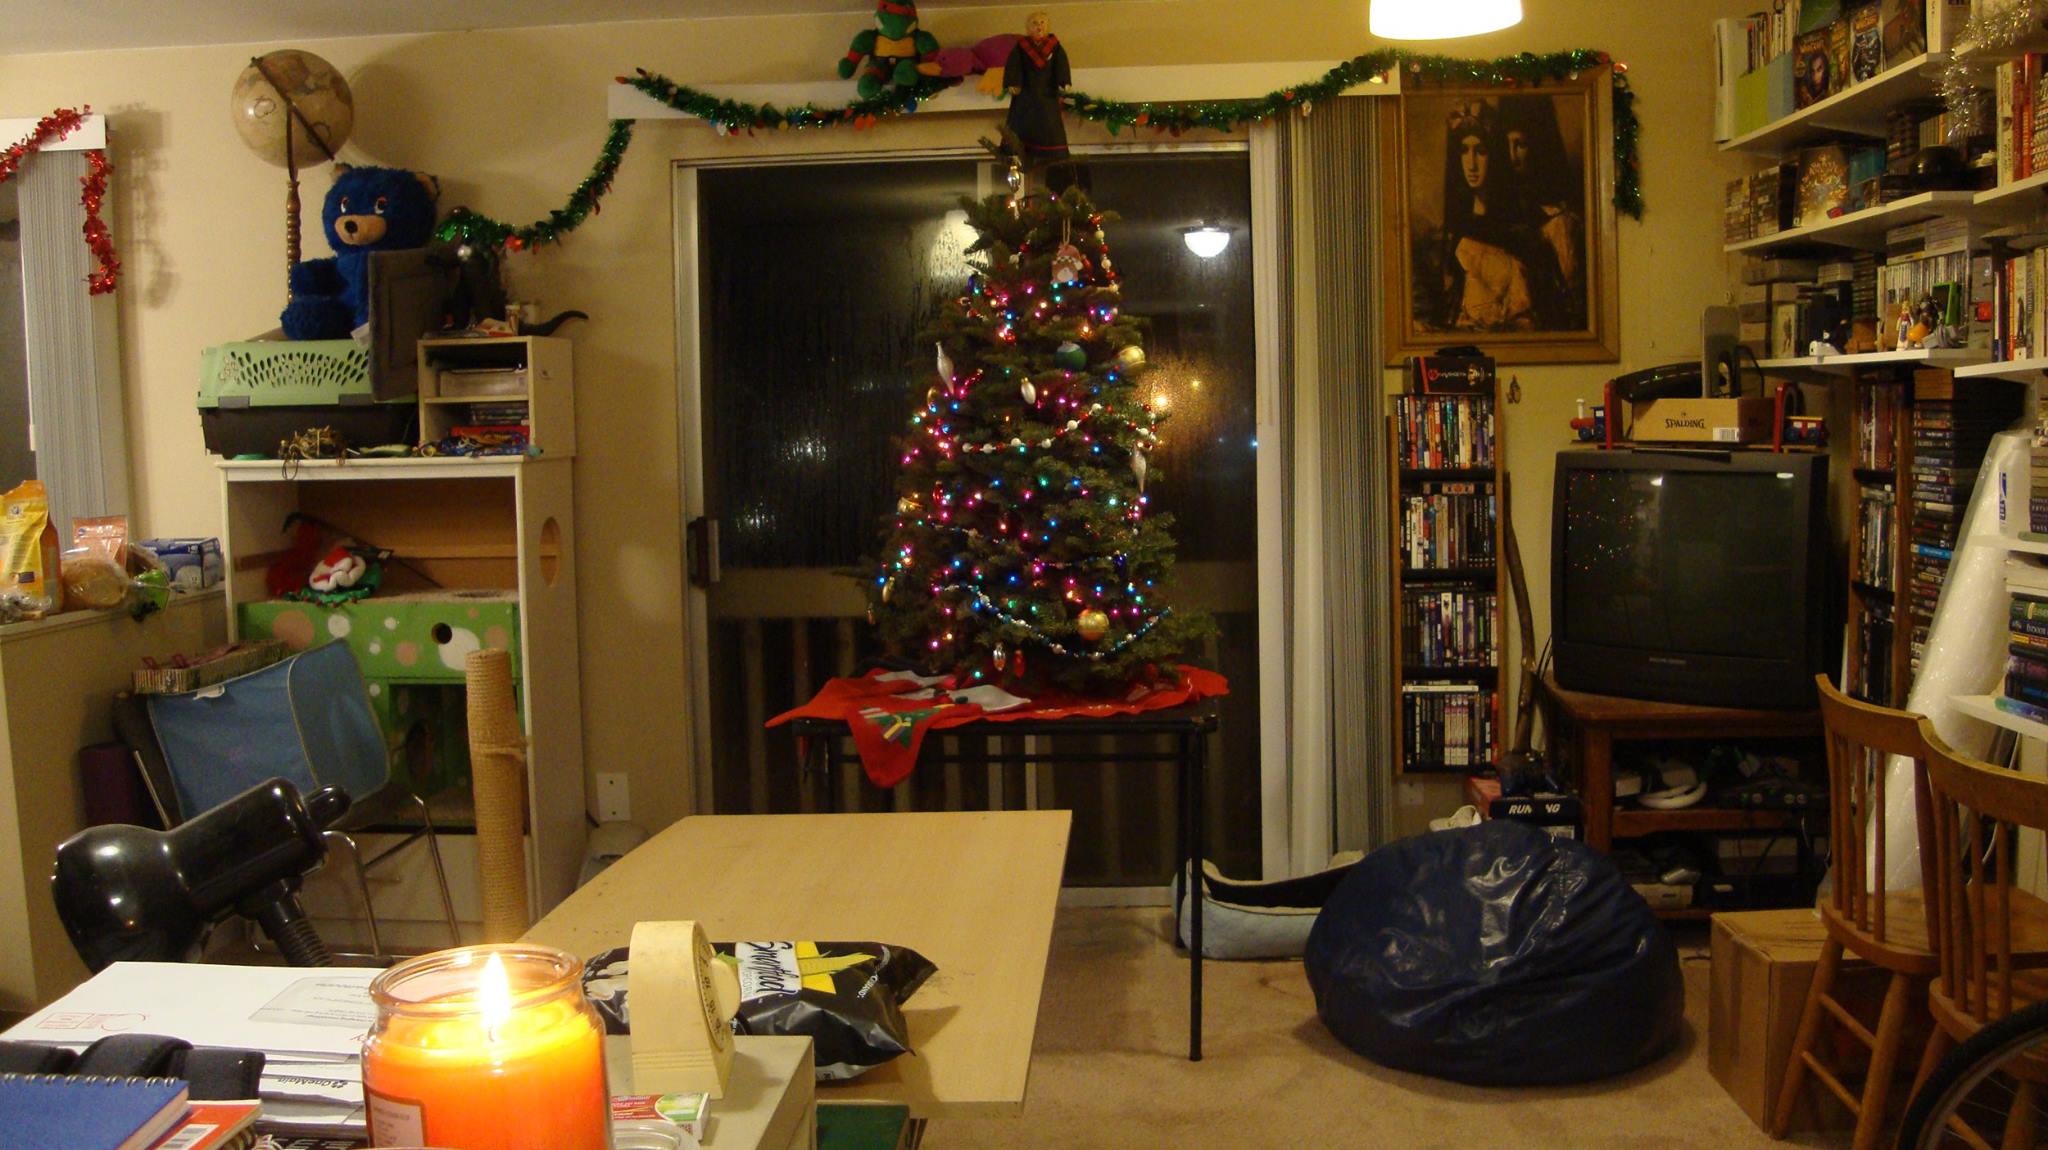 Living room in 2017. Four foot christmas tree on a table in center frame. An old sandbag and CRT television to the right.